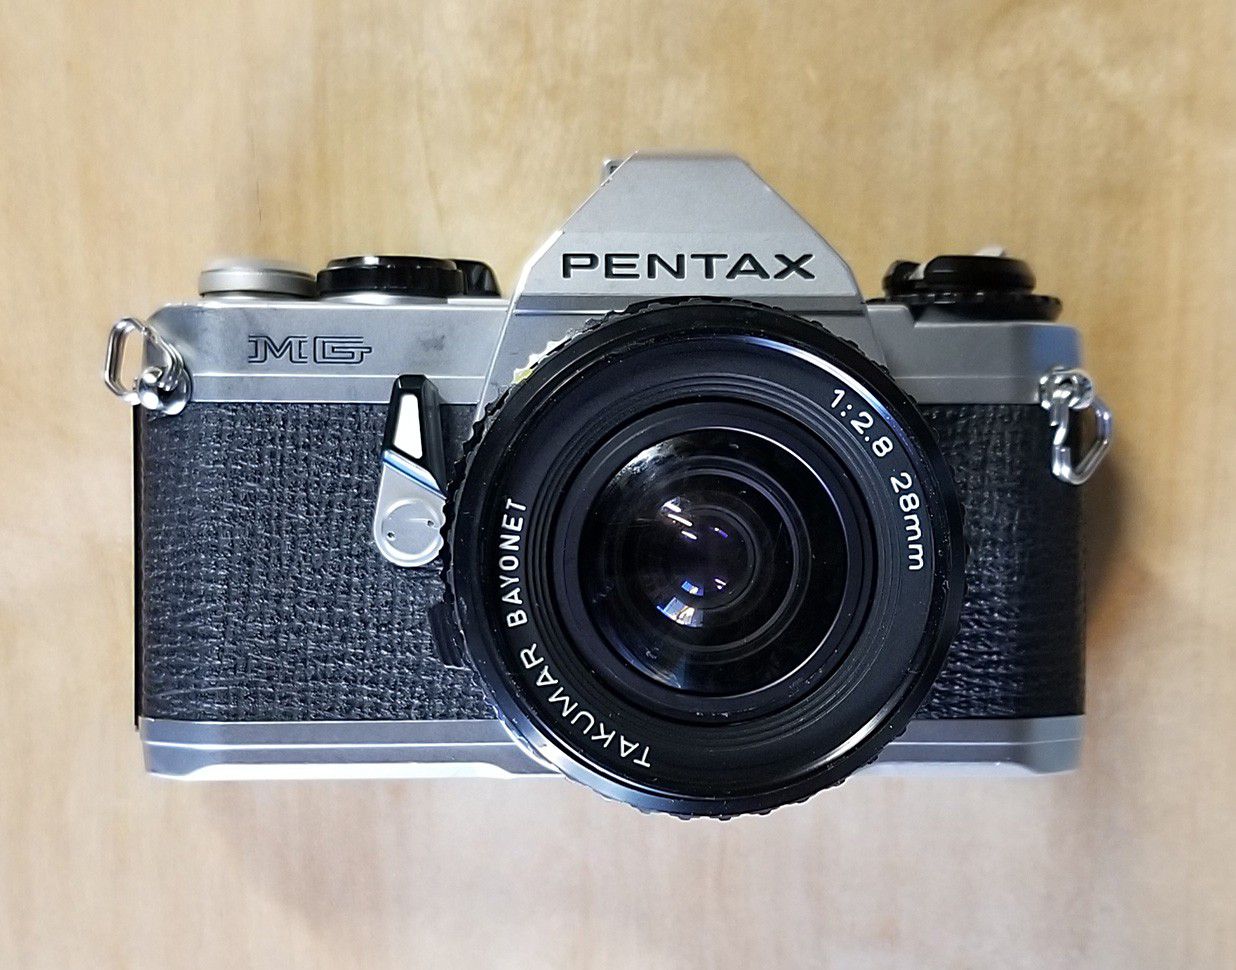 Pentax MG 35mm SLR Film Camera comes with 28mm 1:2.8mm Takumar lens and Zoom 200mm 1:4.5 Lens